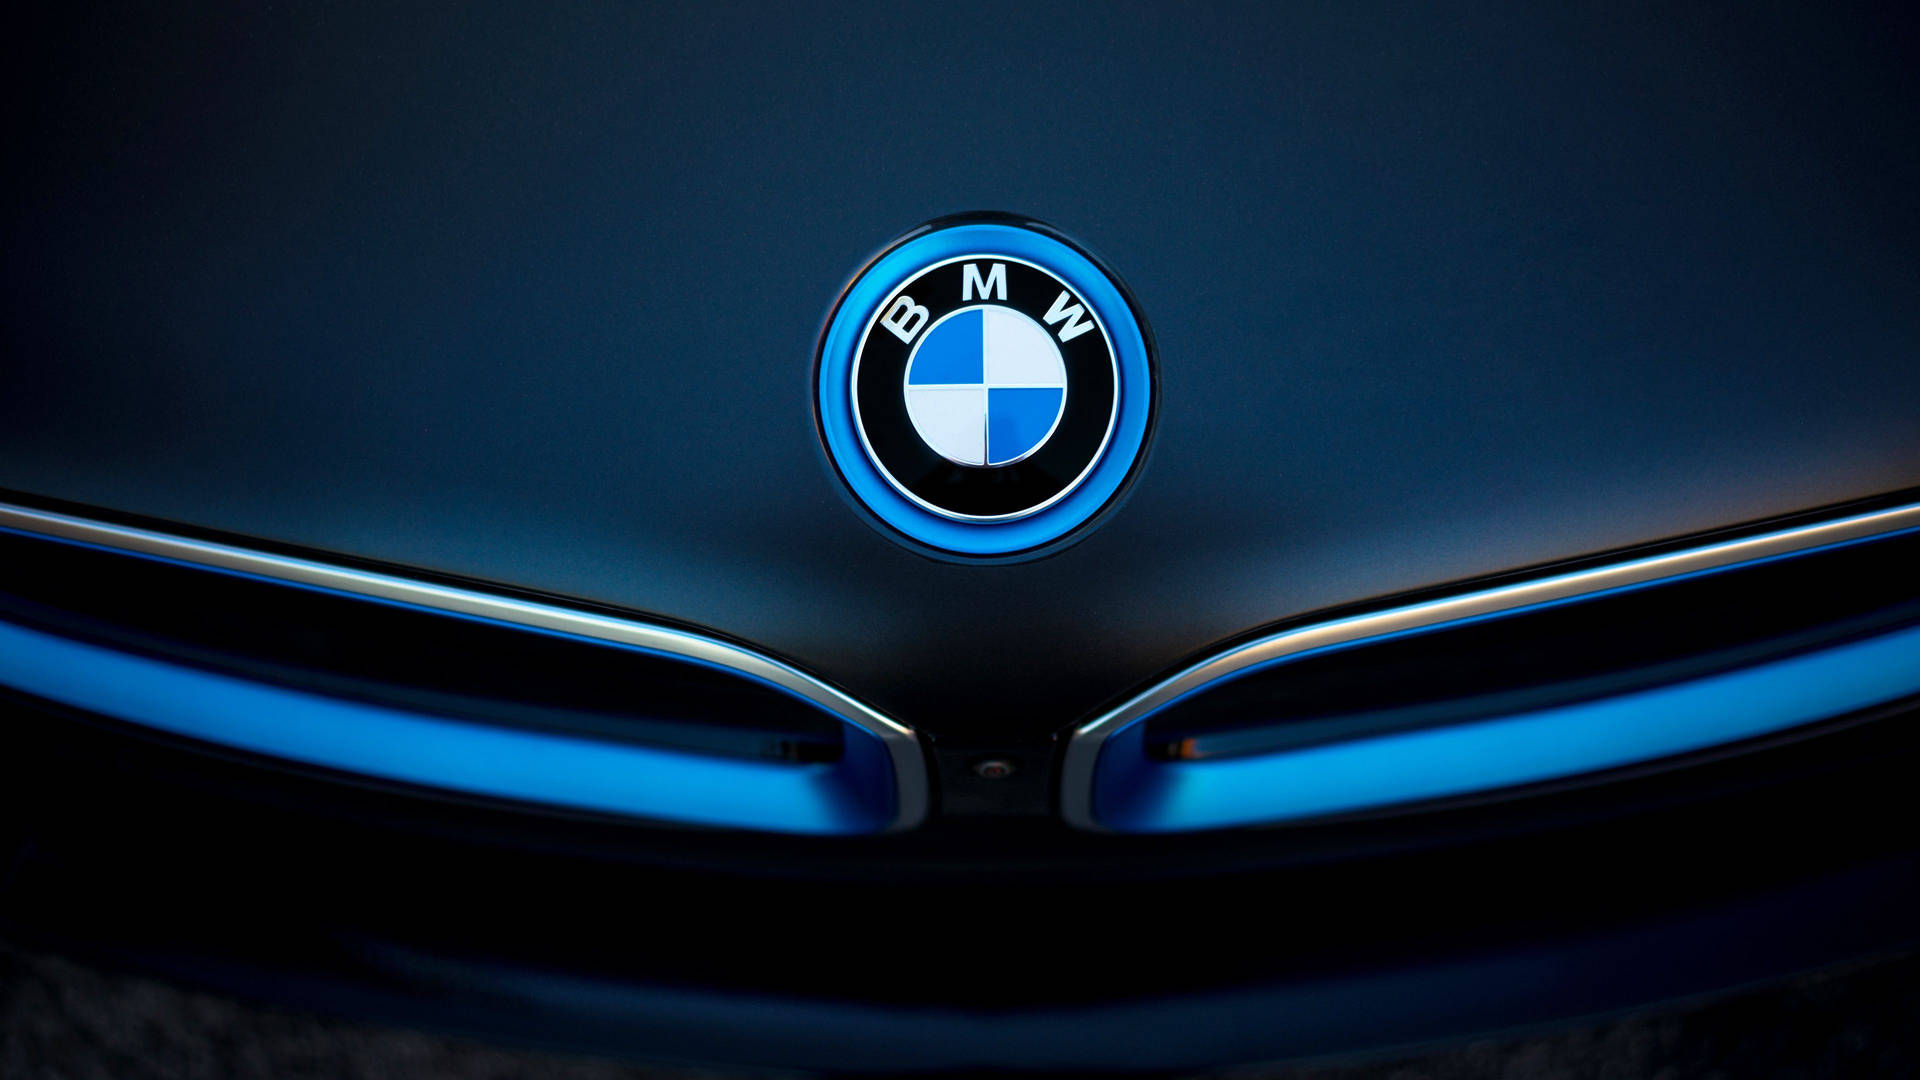 Experience power and luxury with this HD Desktop BMW Wallpaper